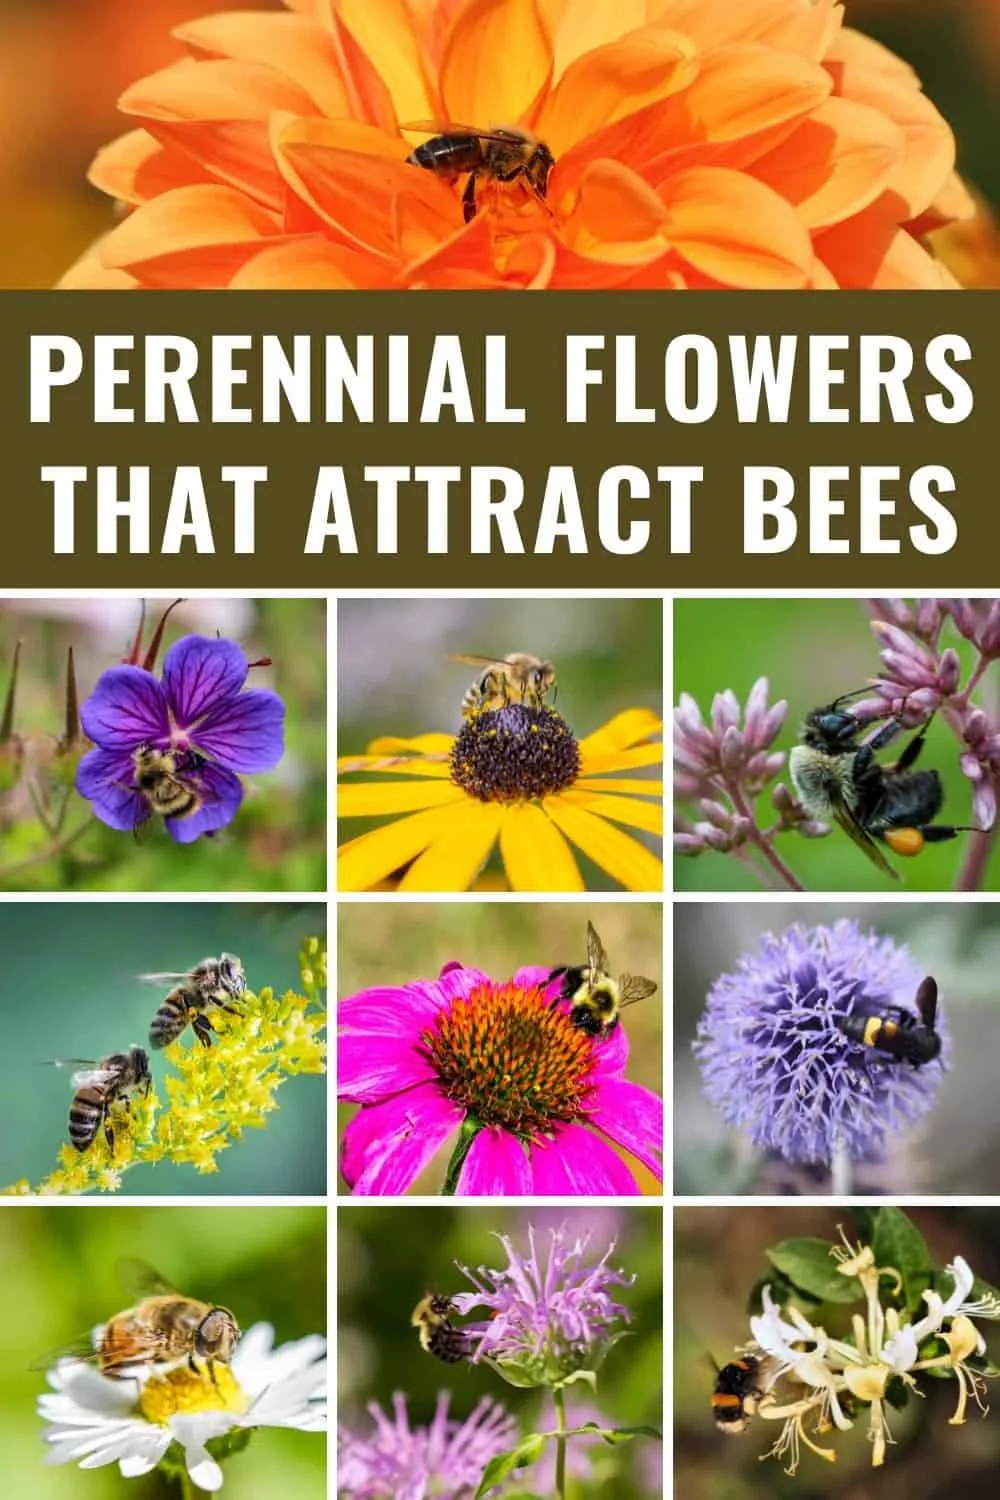 Perennial flowers that attract bees